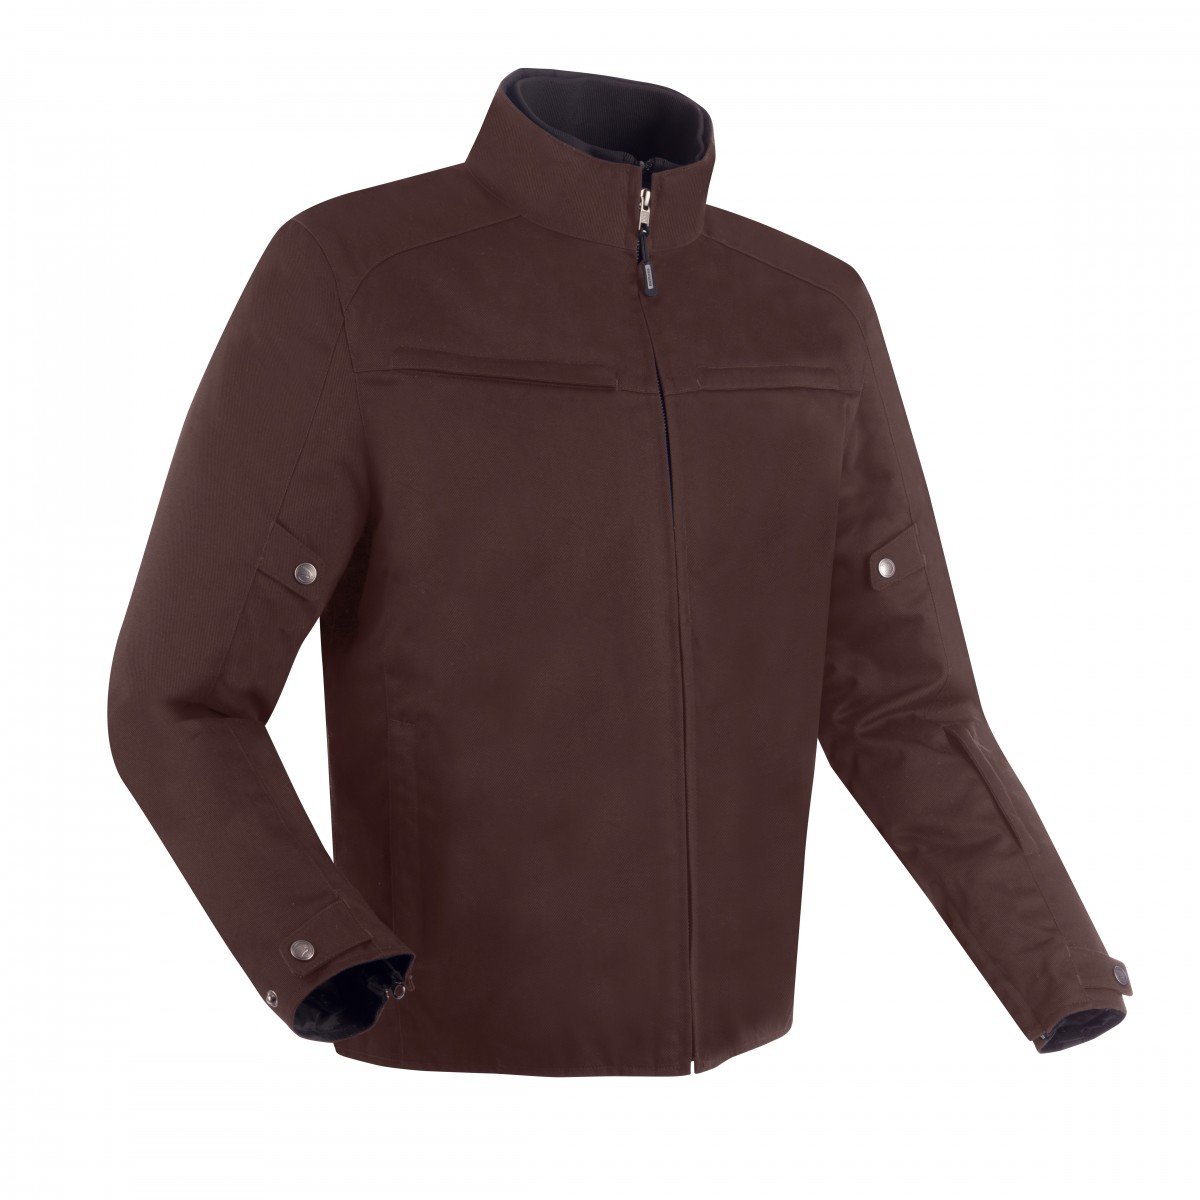 Image of Bering Cruiser Jacket Brown Size 3XL ID 3660815169308